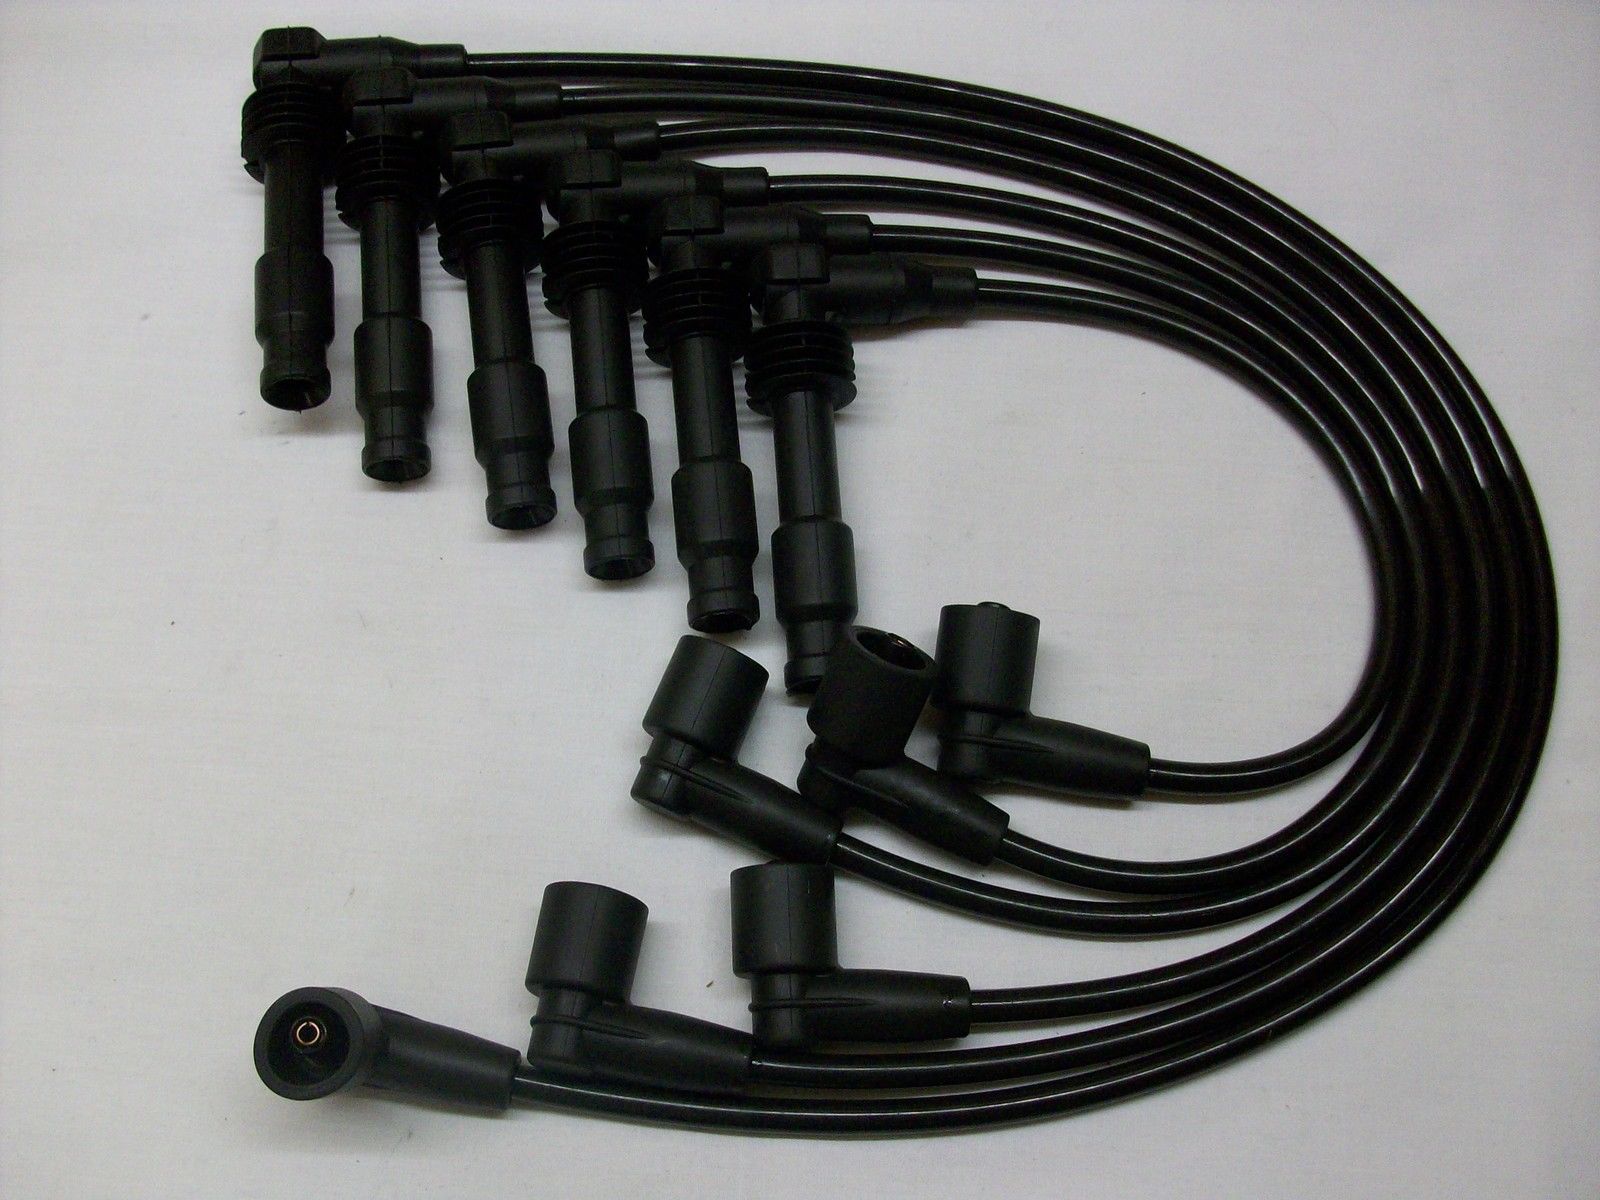 Black 8mm Performance Ignition Leads Will Fit Vauxhall Opel Omega V6 Quality Ht